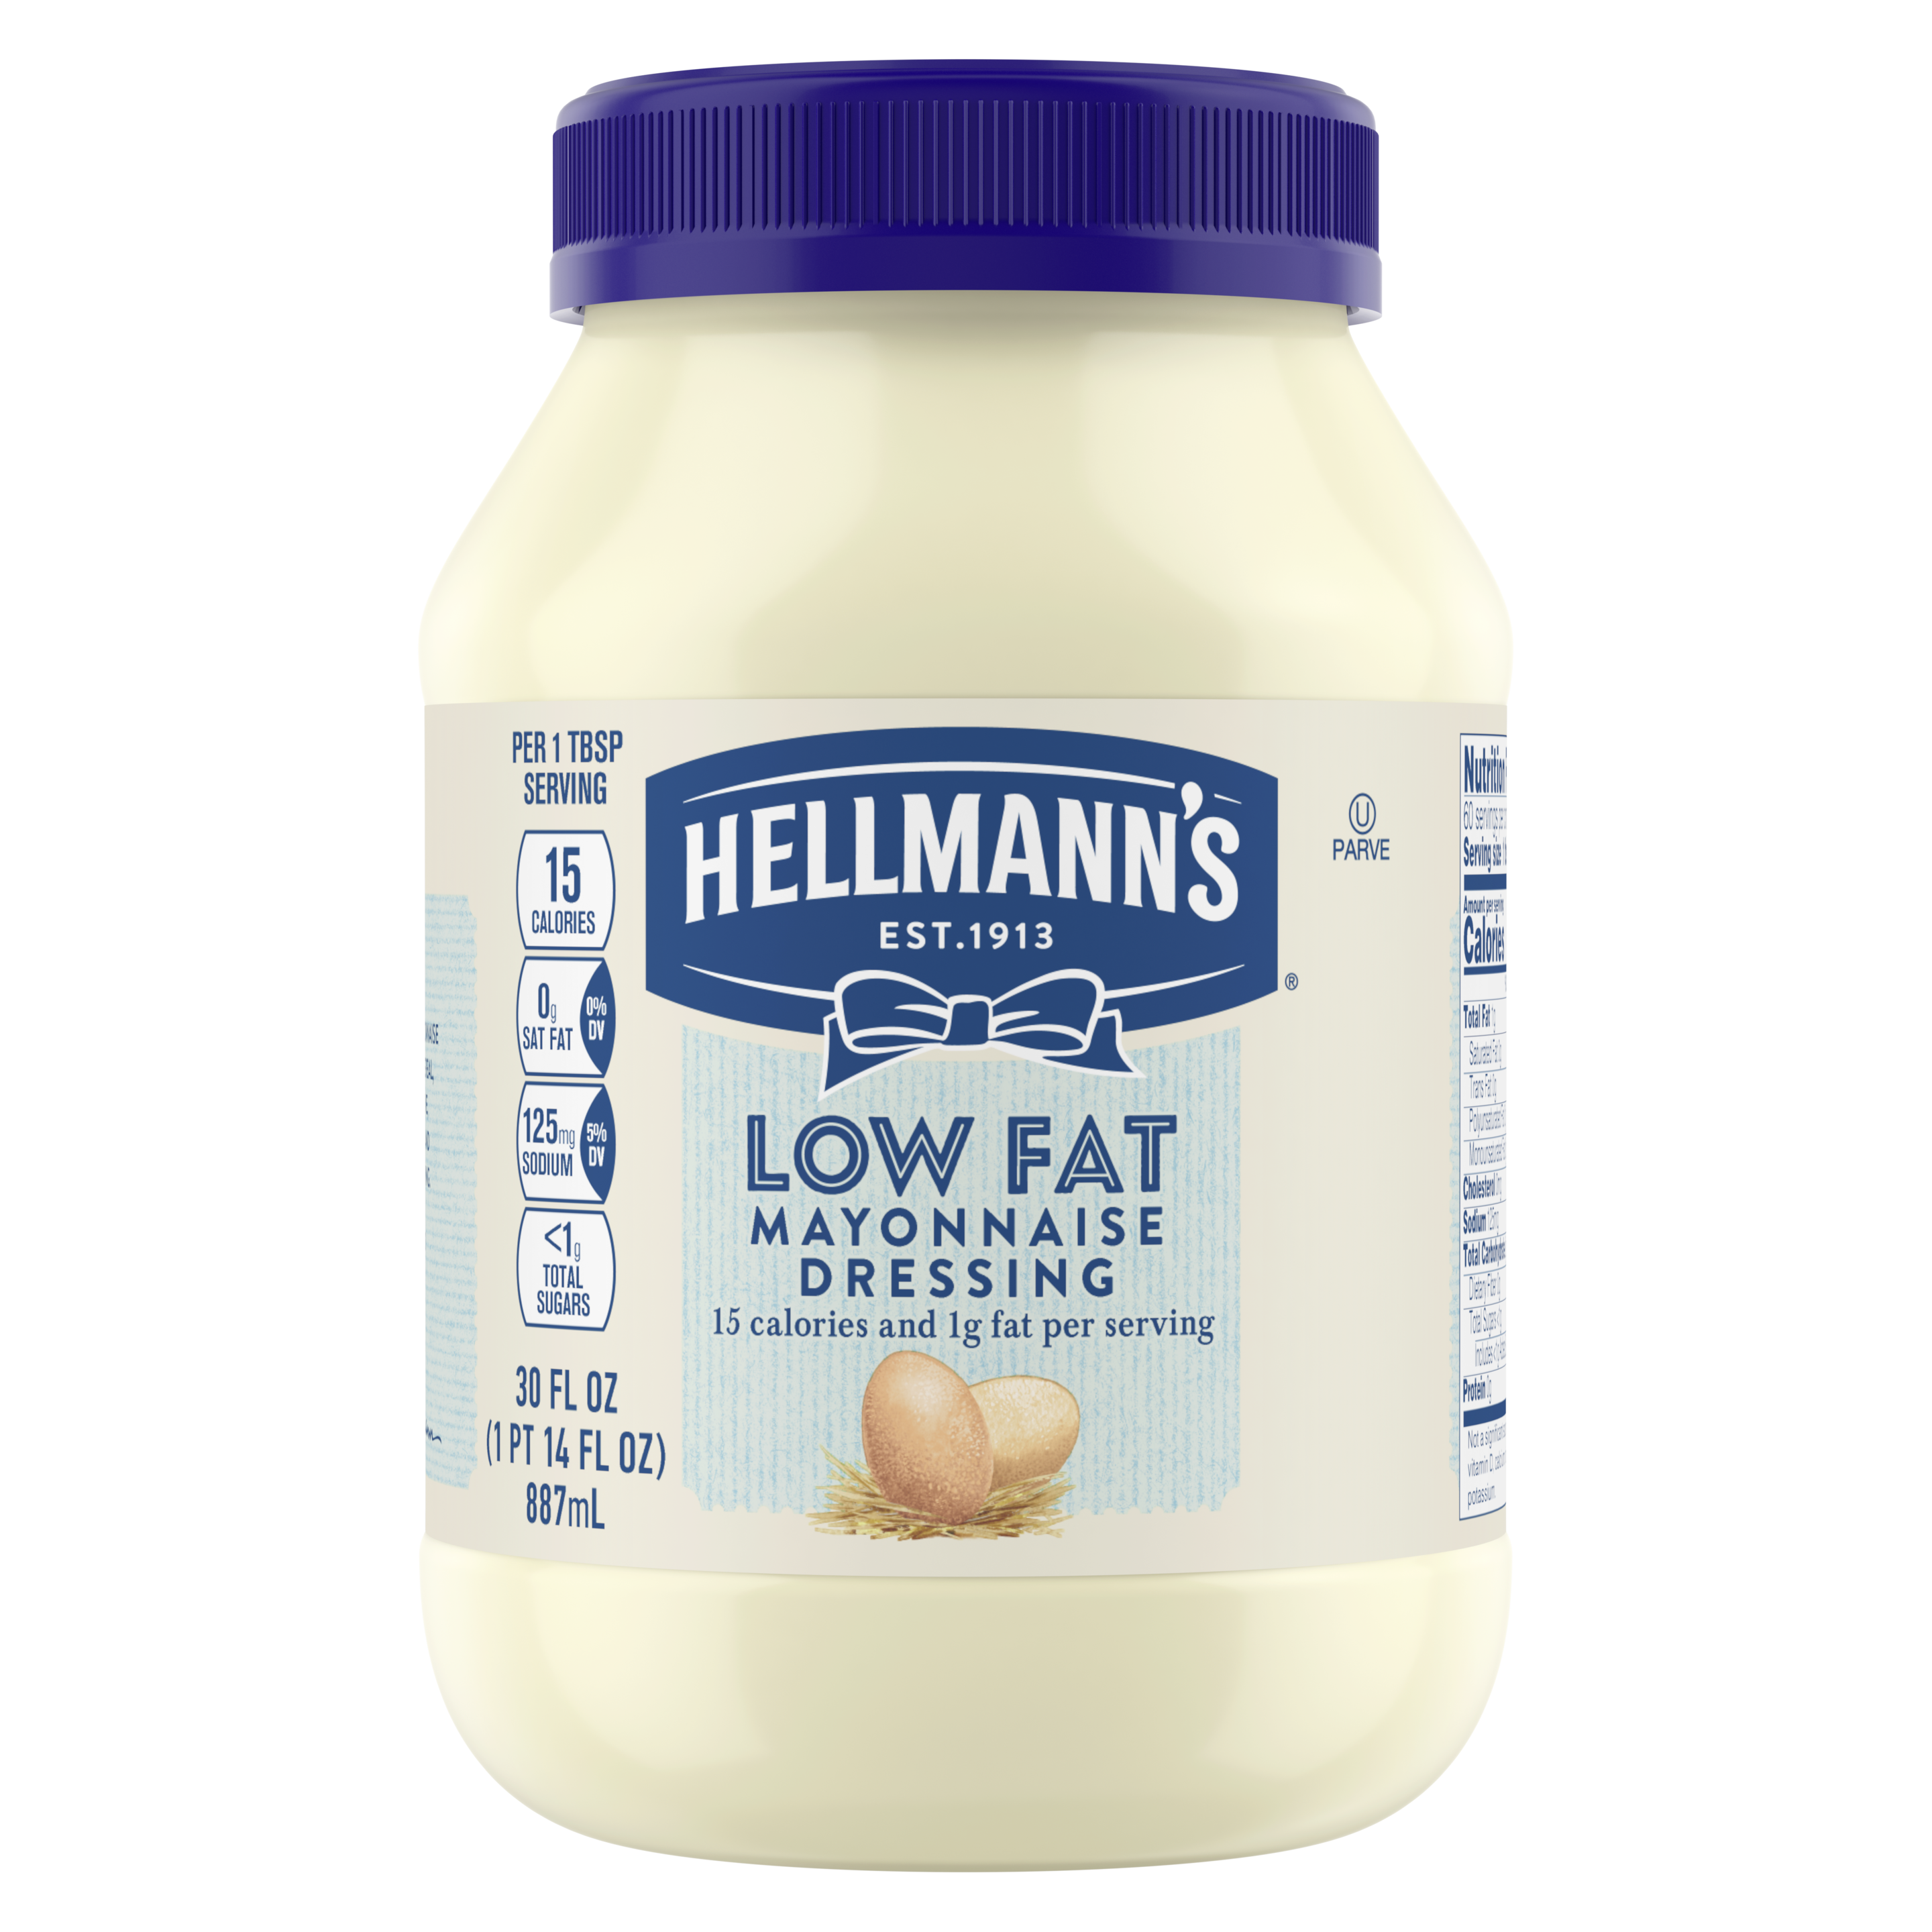 Low Fat Mayonnaise Dressing